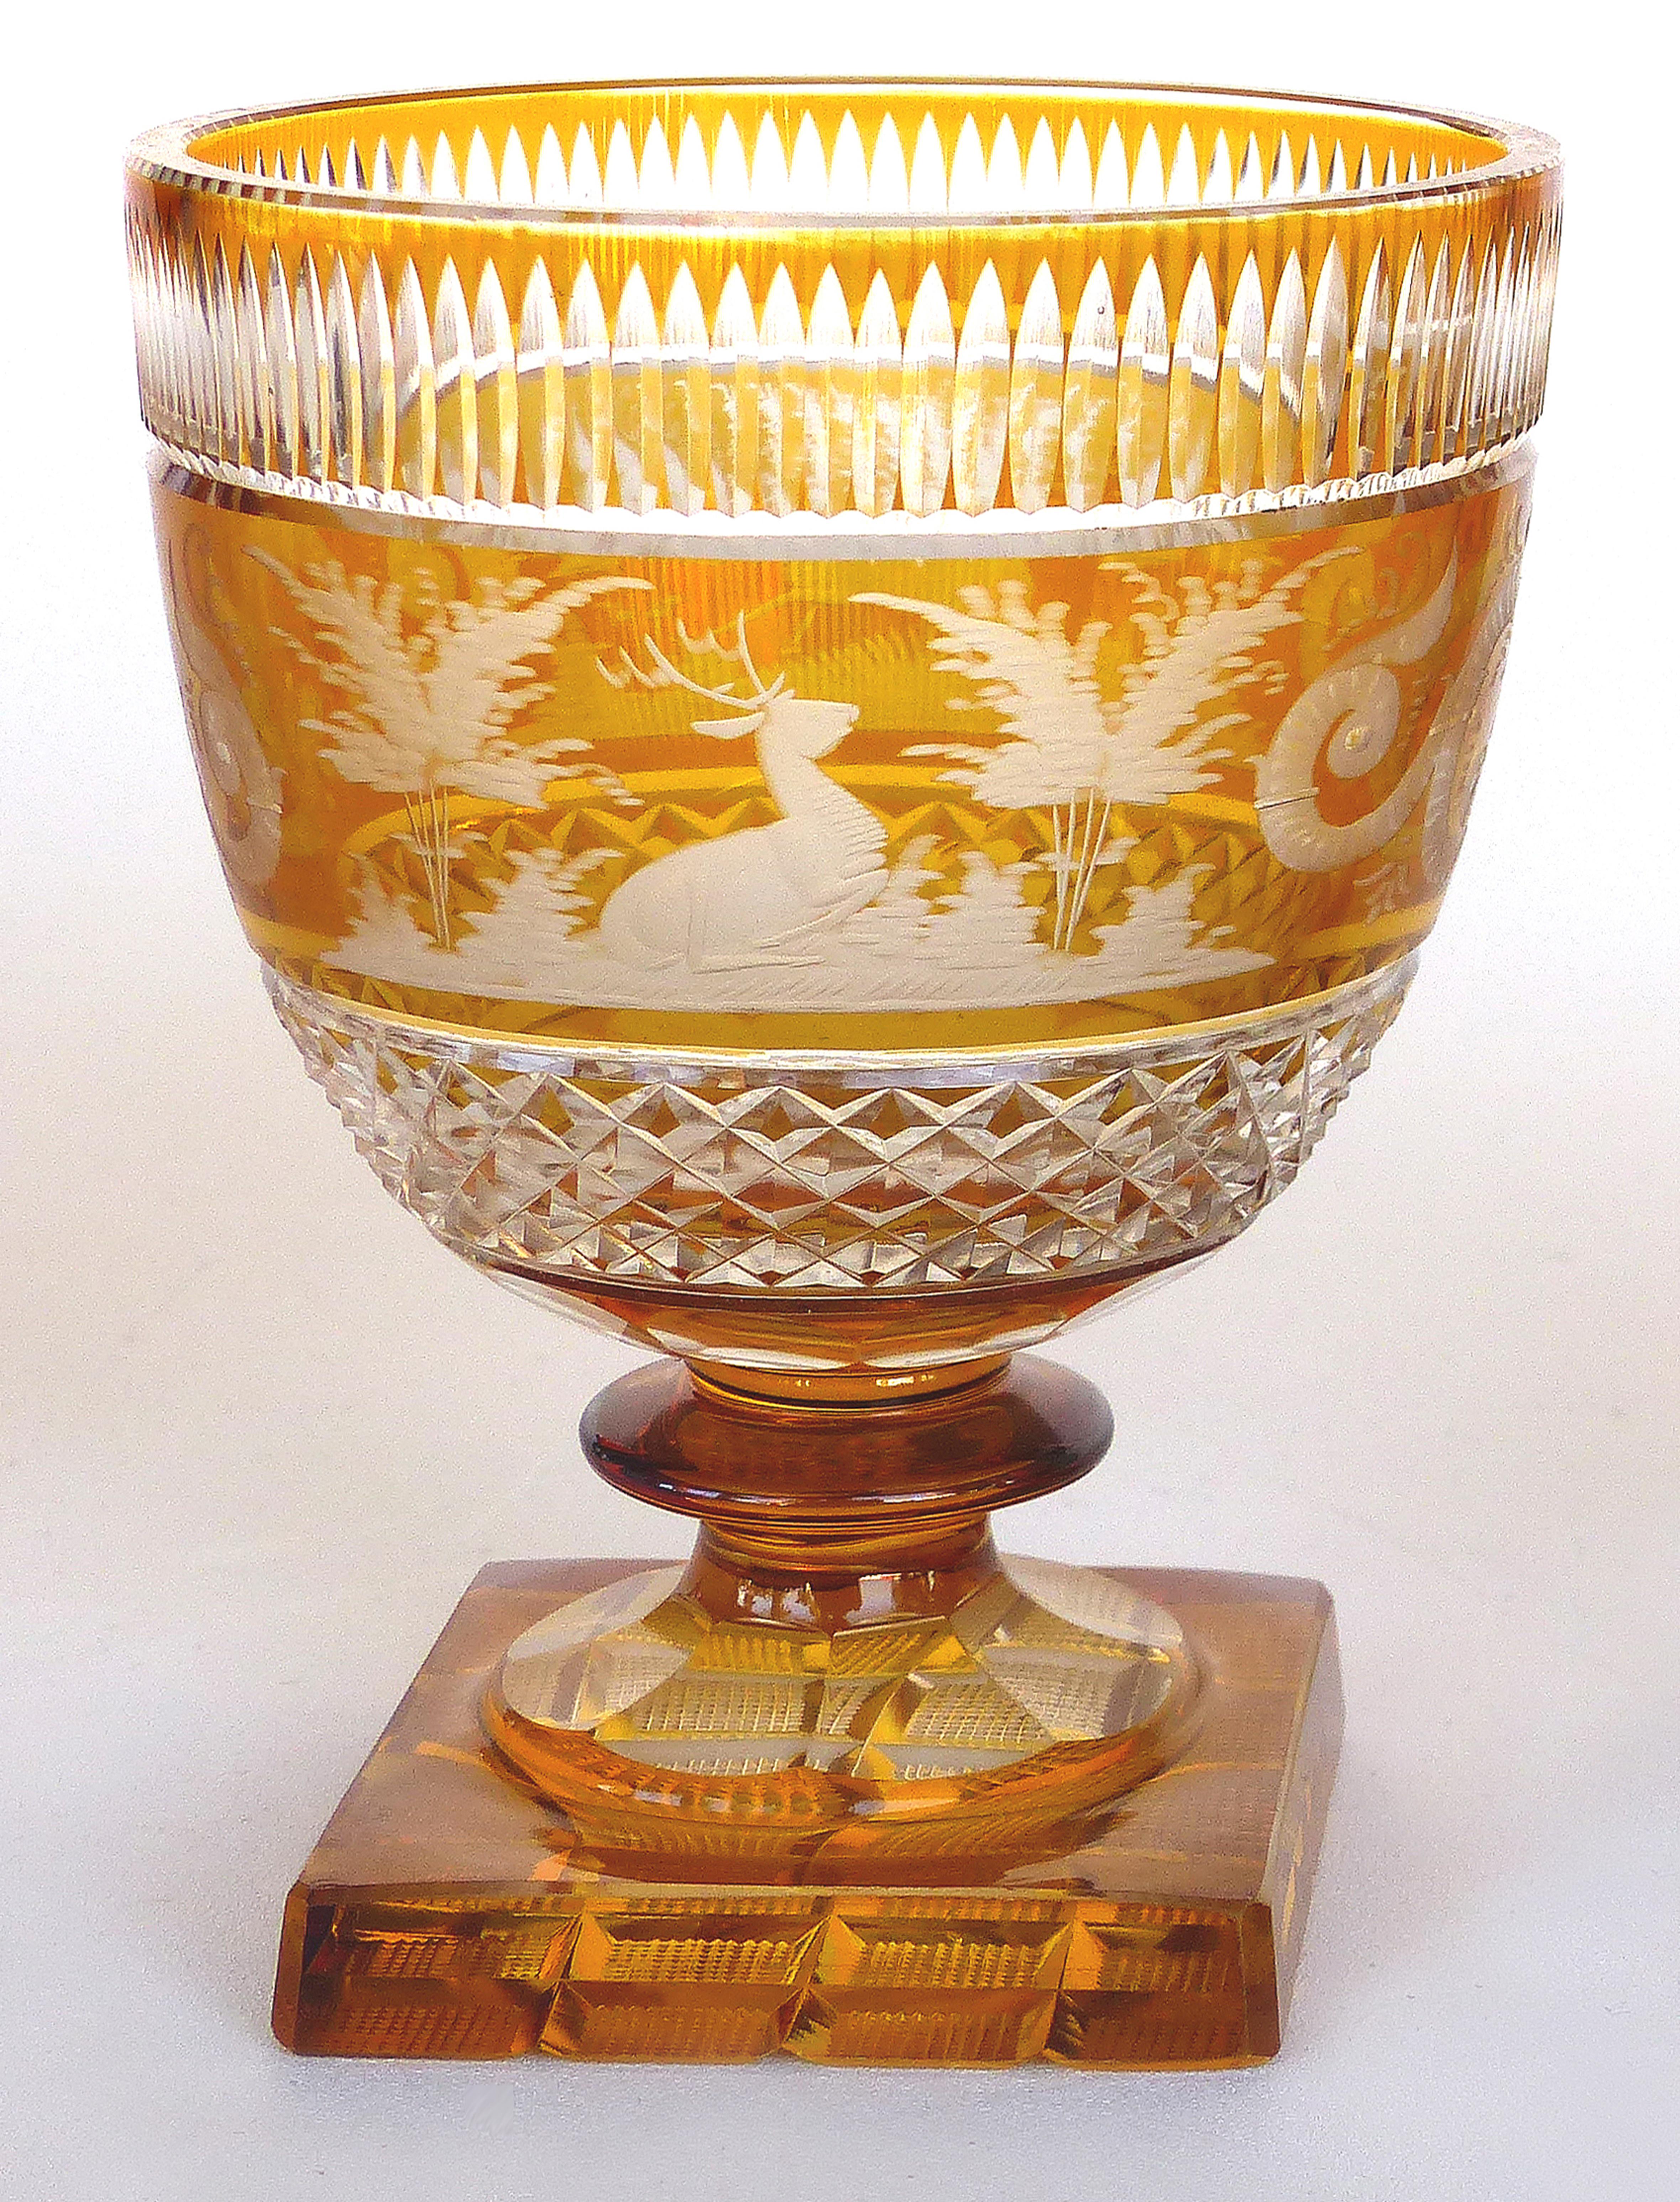 Offered for sale a fine pair of Bohemia glass amber to clear crystal goblets with finely etched designs. These heavy, well made goblets have designs with stags and foliage.